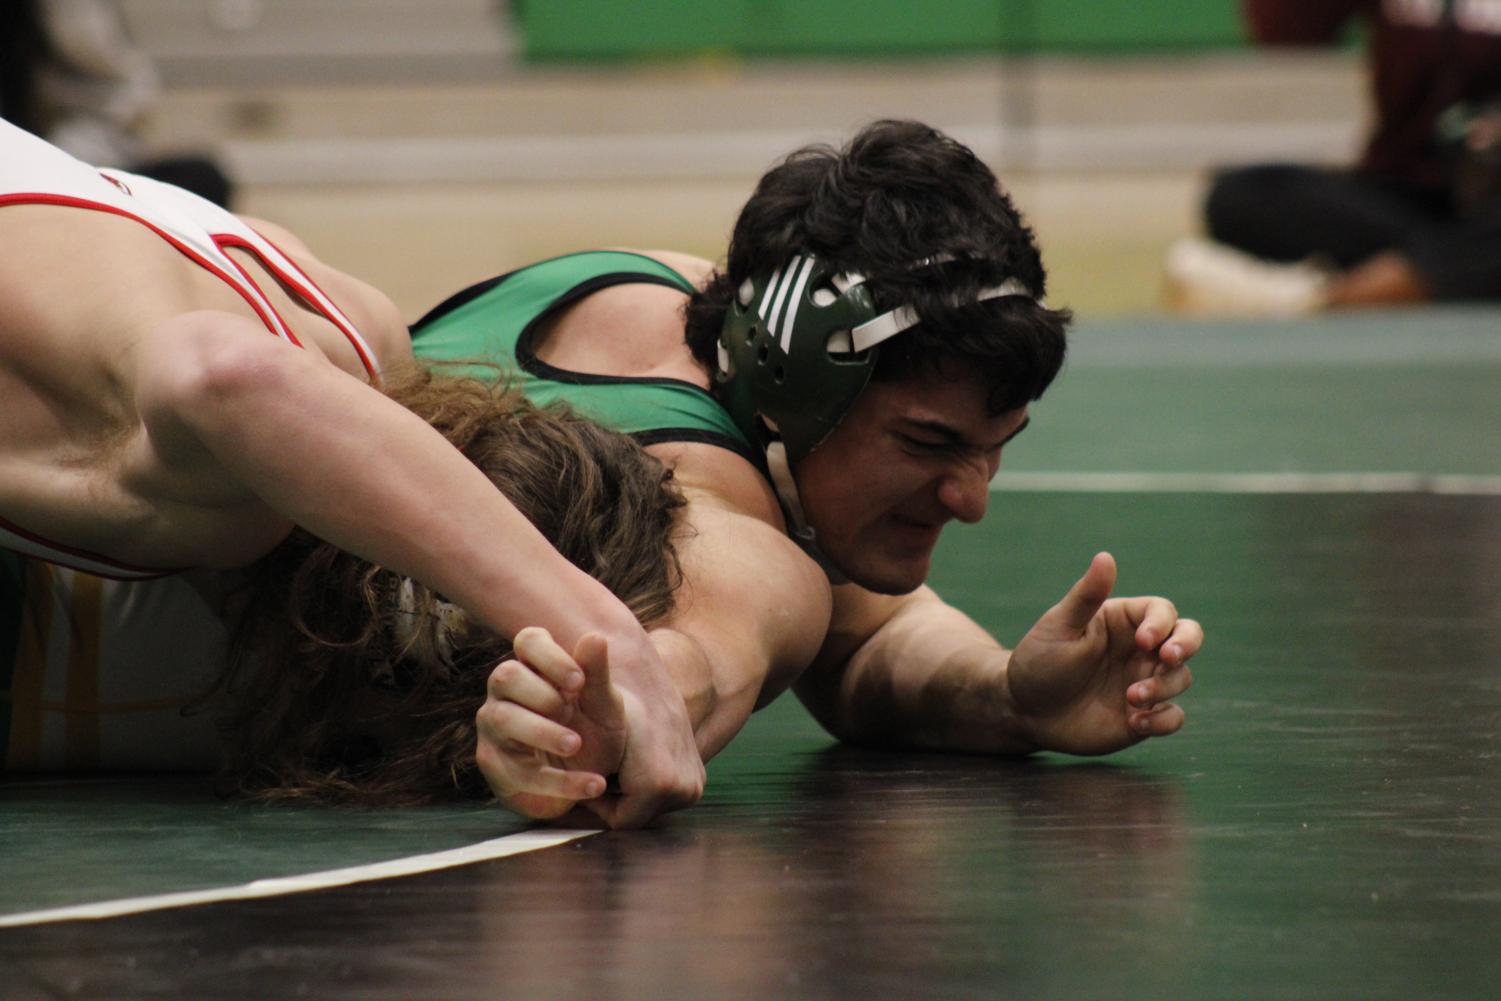 Wrestling+Vs+Maize+%28Photos+by+Abigail+Kuhn%29